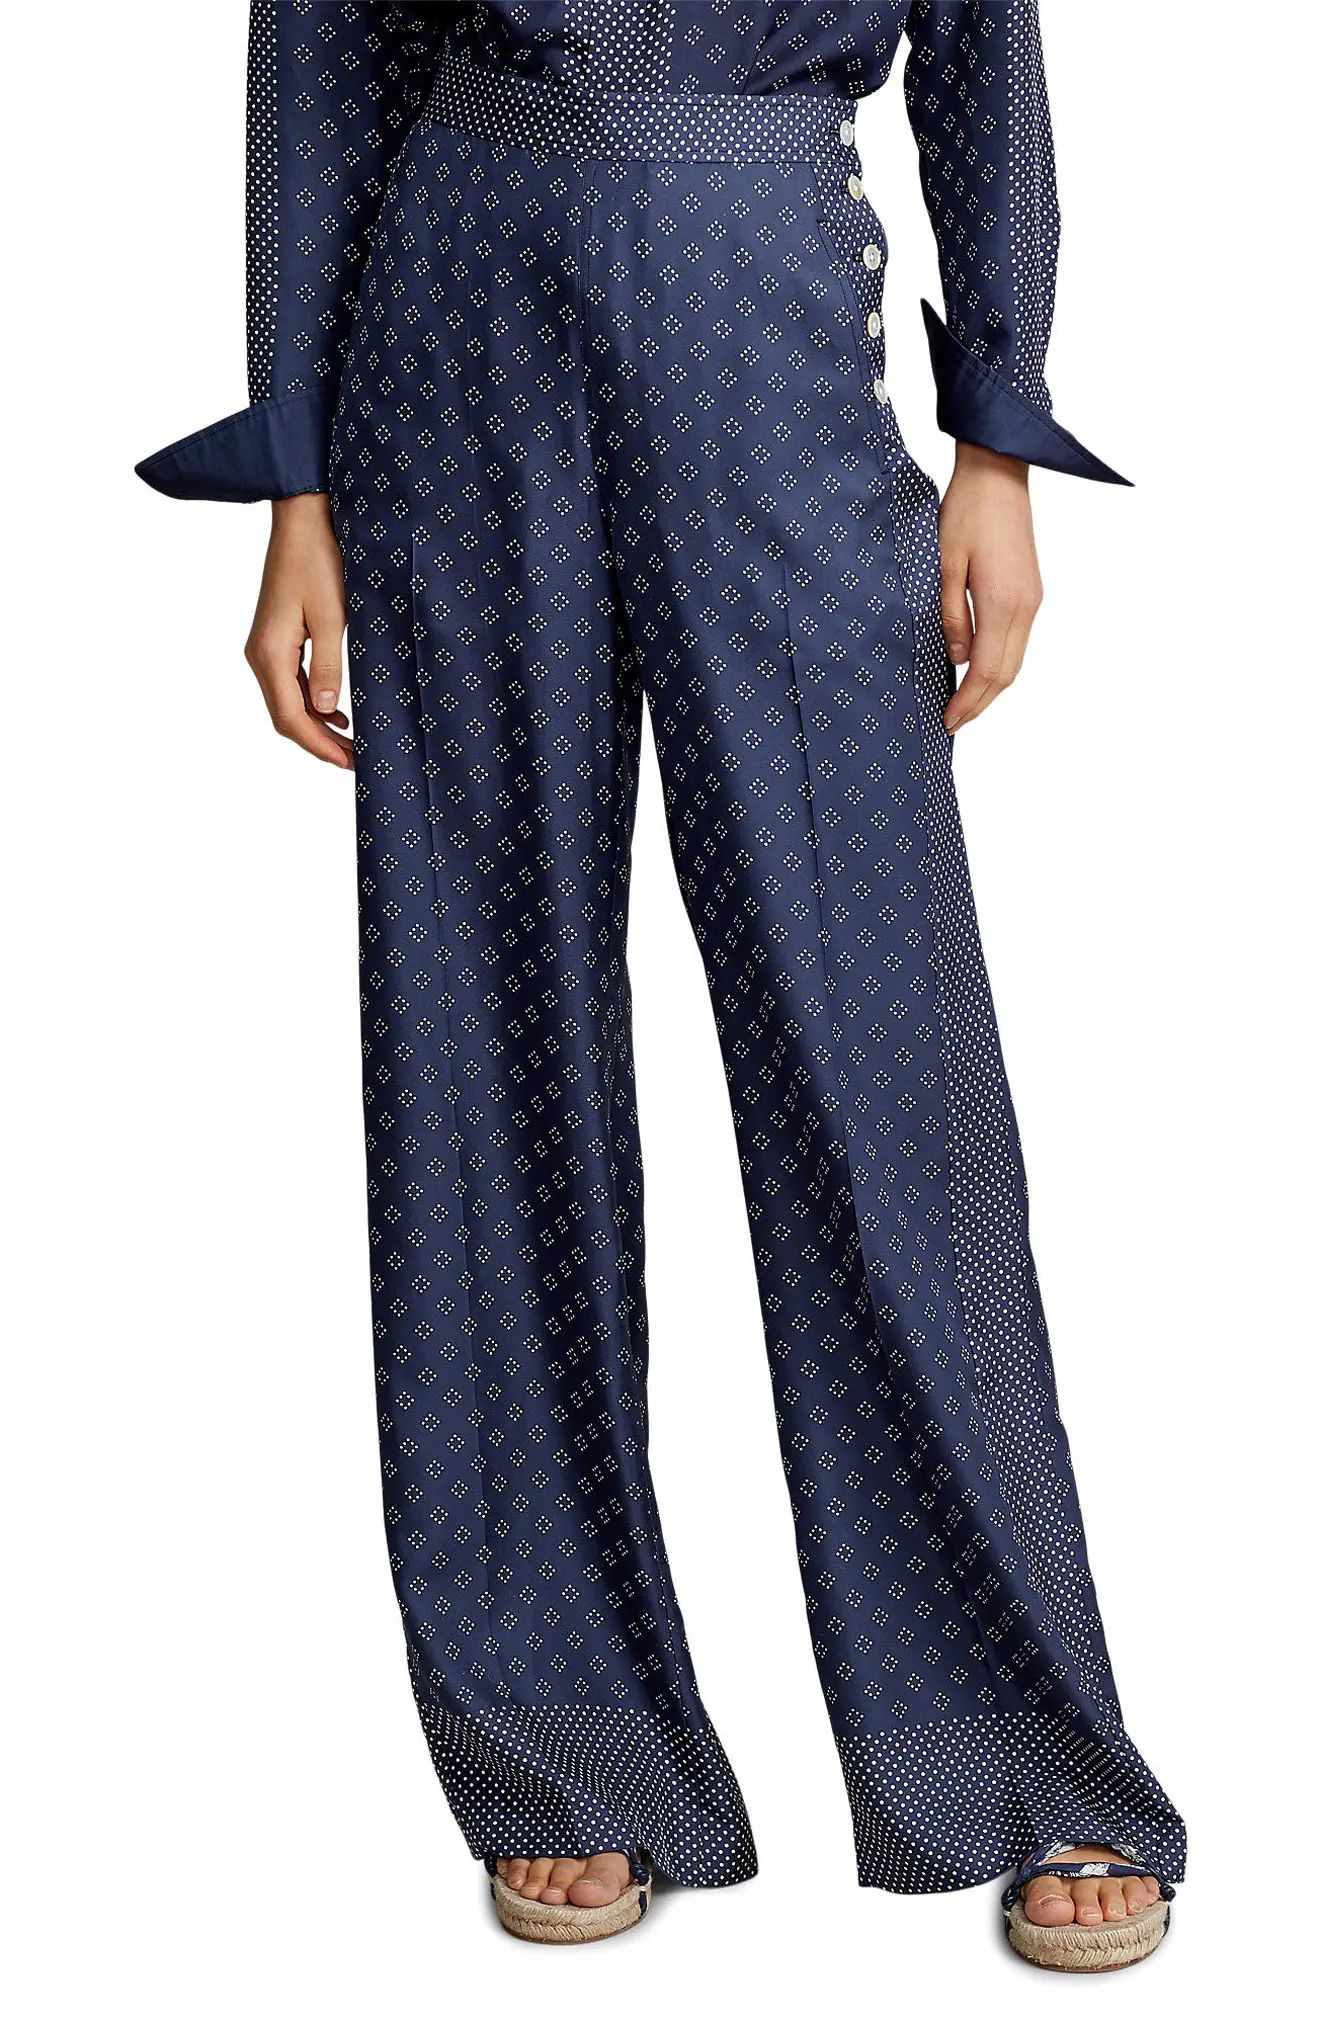 Polo Ralph Lauren Scarf Print Wide Leg Silk Trousers in Navy/White Print at Nordstrom, Size 2 | Nordstrom